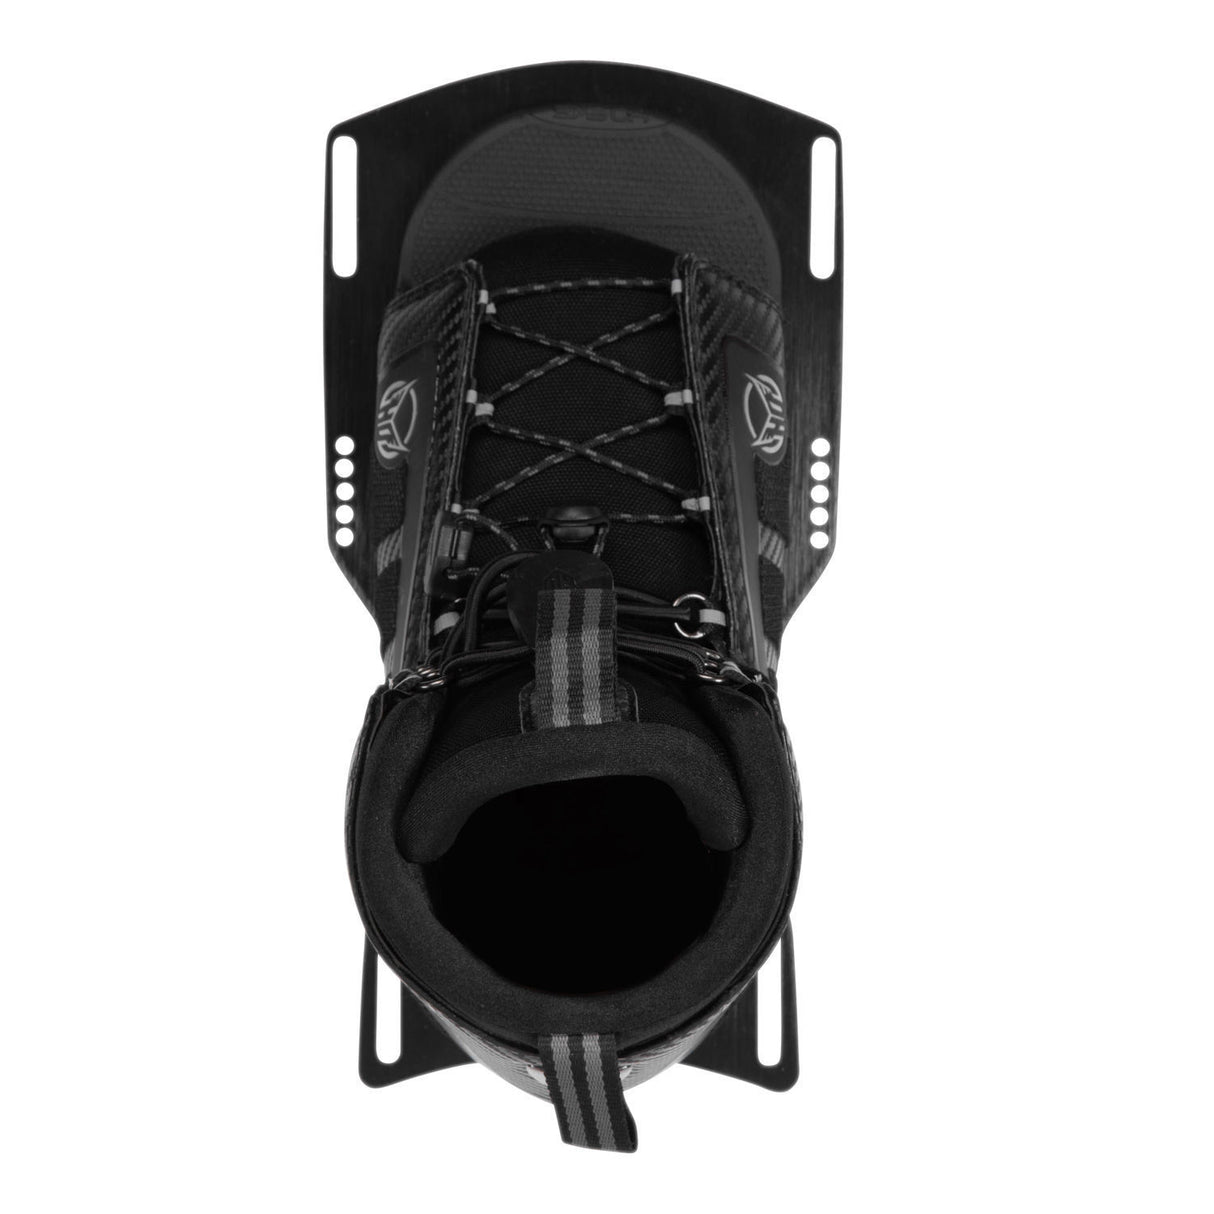 HO Stance 130 Water Ski Binding - Front or Rear